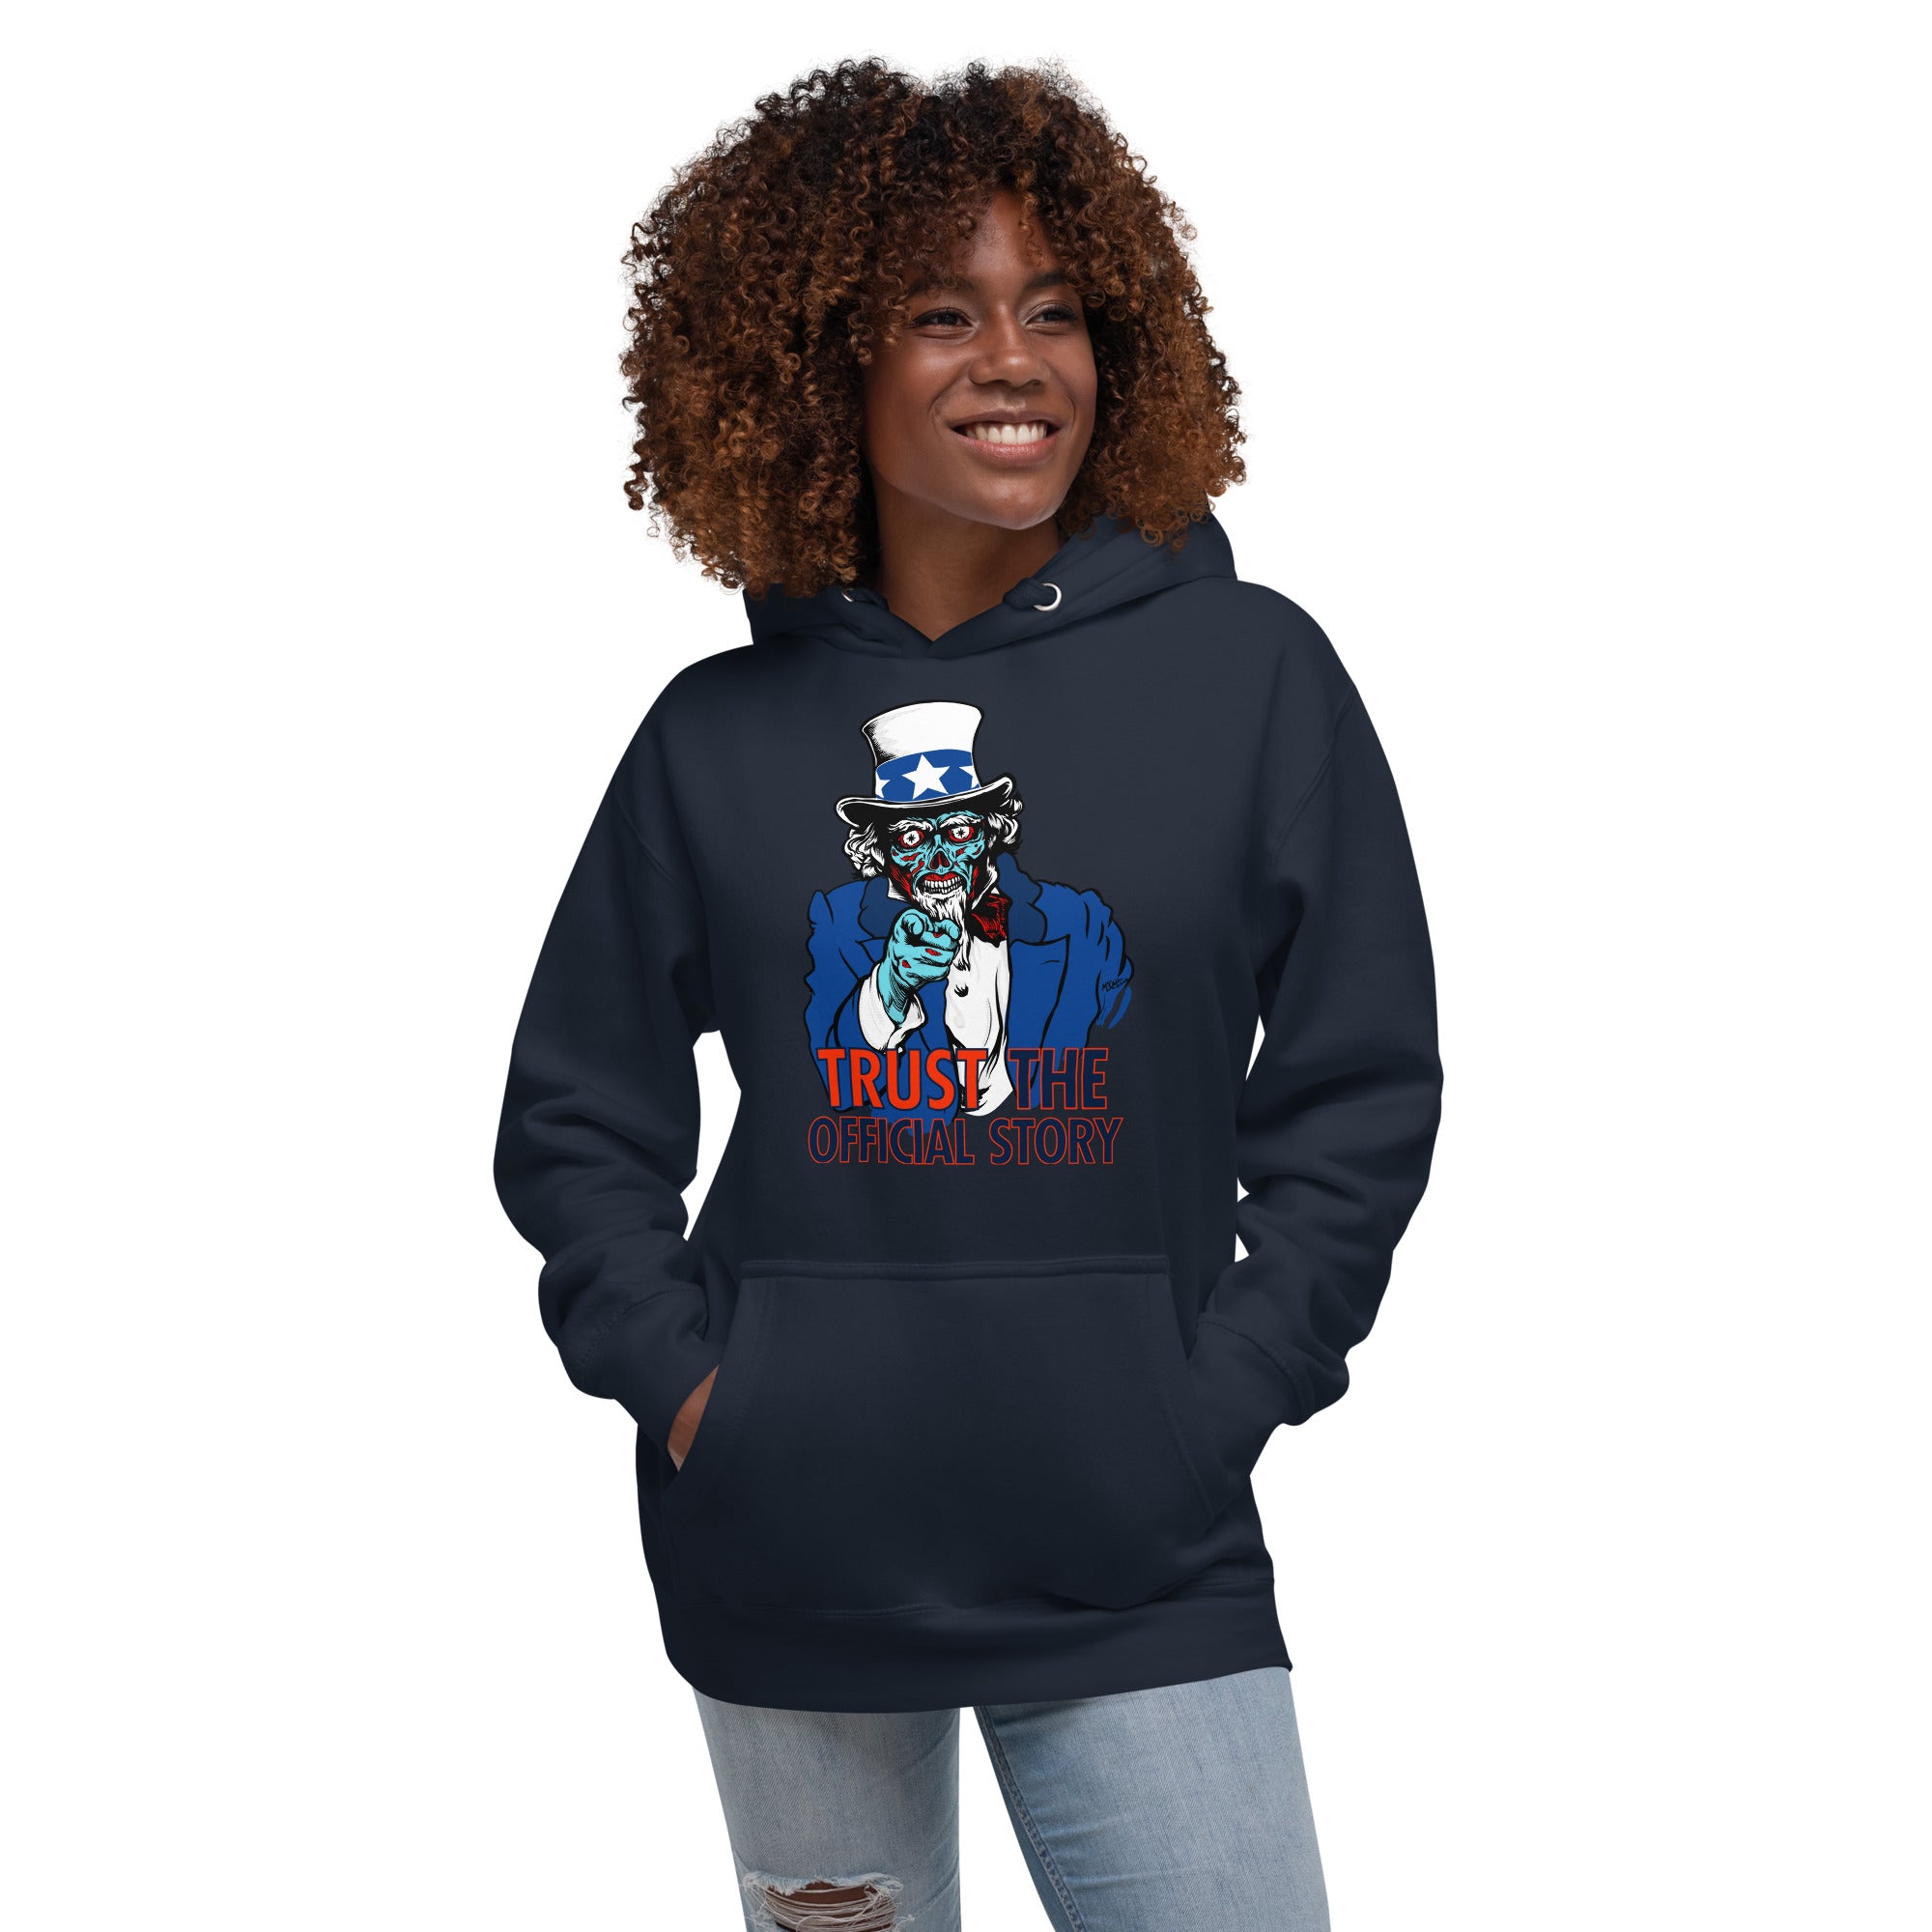 They Live Uncle Sam Alien Trust the Official Story Hoodie Sweatshirt